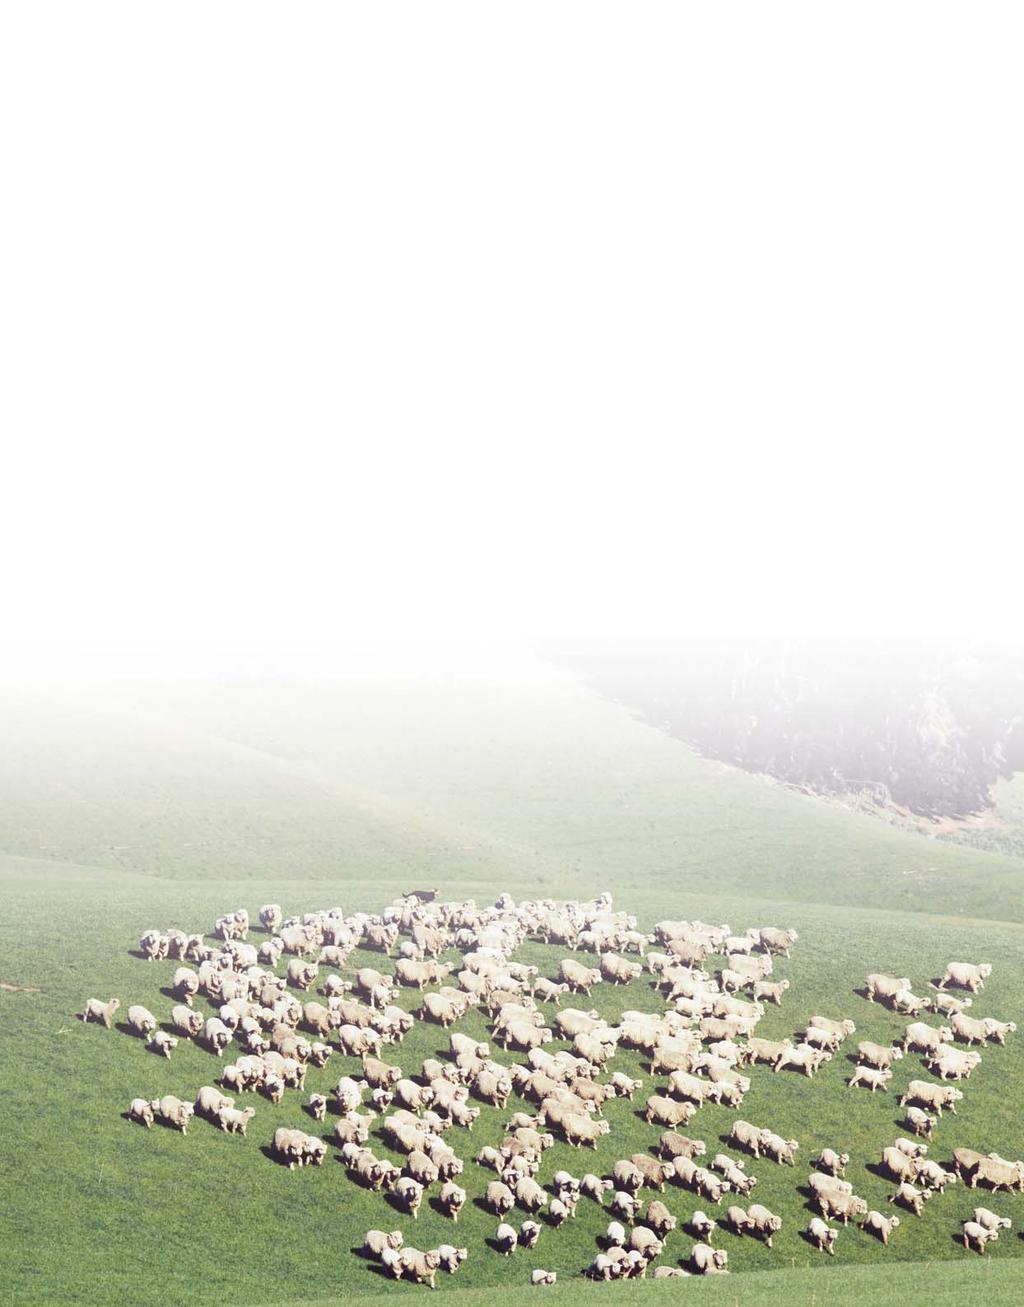 Foreword from Meat & Wool New Zealand Mark Jeffries, CEO Meat & Wool New Zealand In late 2004 Meat & Wool New Zealand surveyed 3000 farmers to determine their business needs, and find out how we